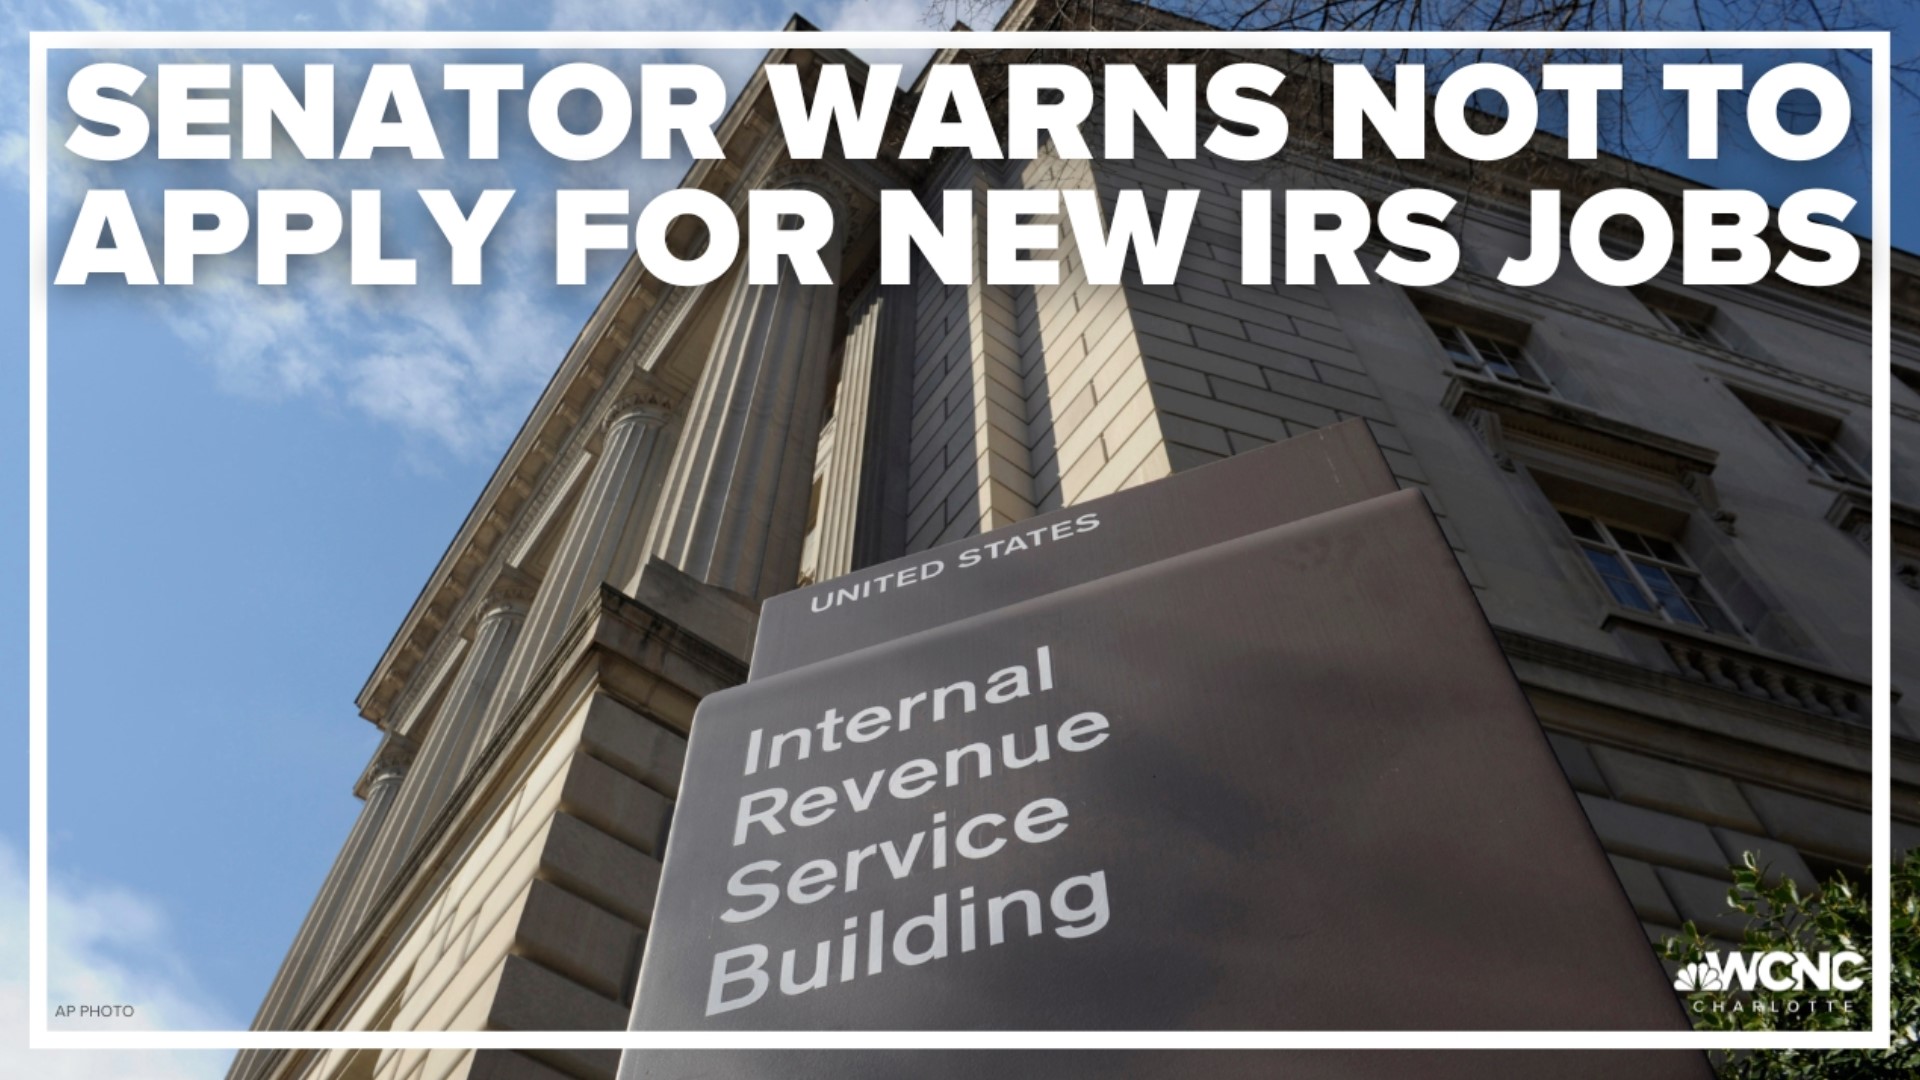 Senate Republican Campaign Chair Rick Scott published an open letter encouraging job seekers to not pursue new IRS positions.